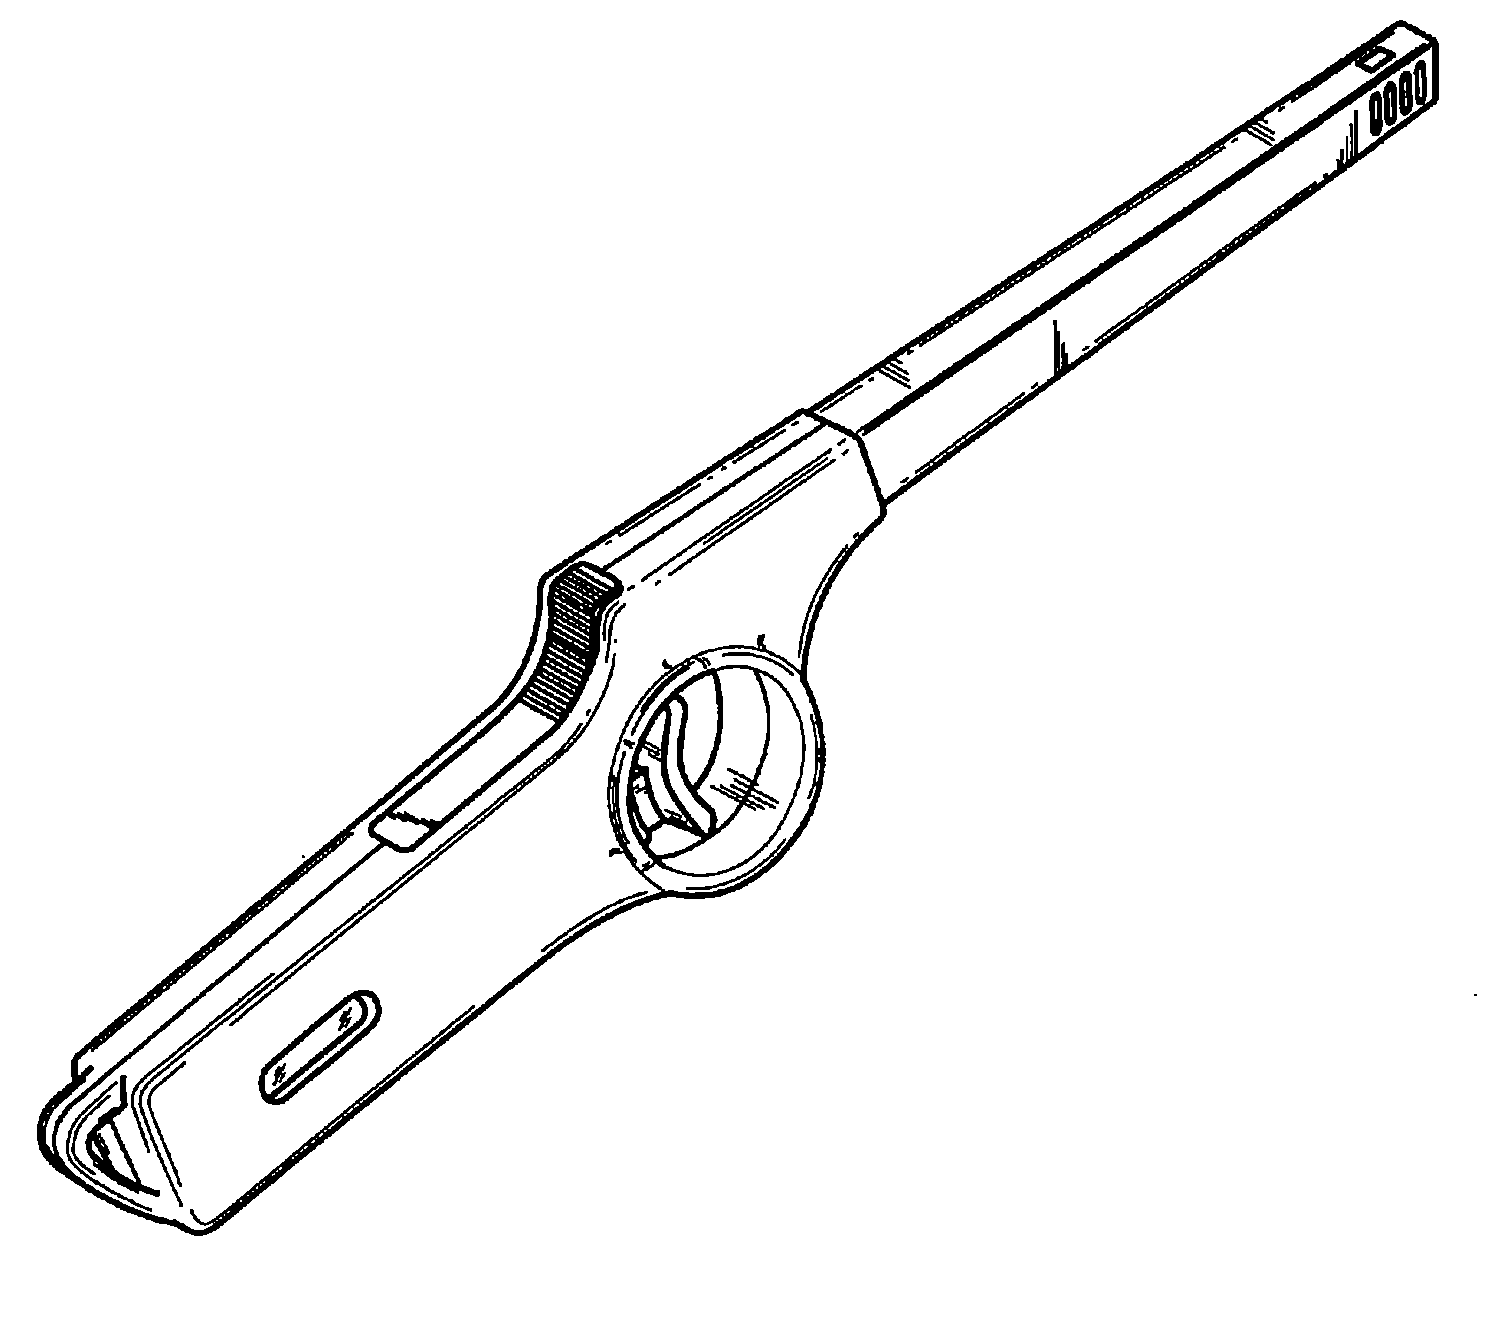 Example of a design for a fire starter or igniter.
